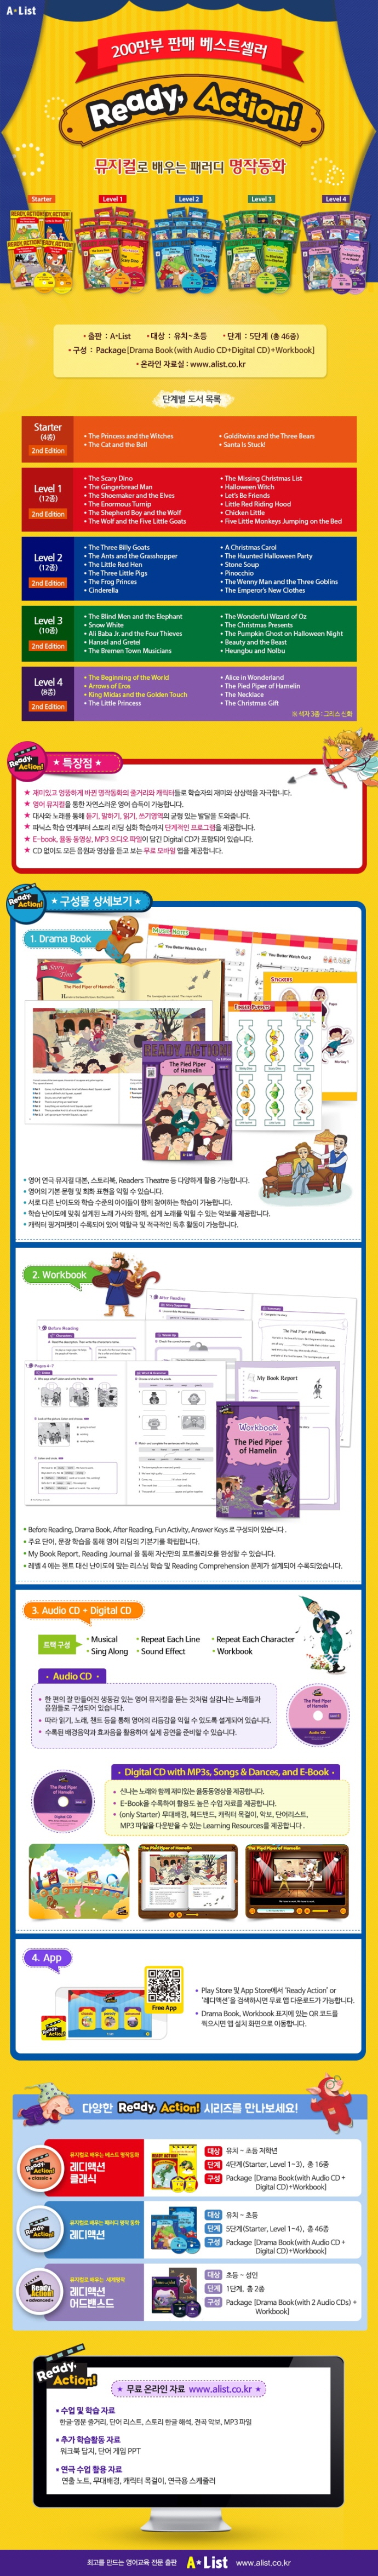 Pack-Ready Action 2E (Starter): Golditwins and the Three Bears[SB+WB+CD] 도서 상세이미지